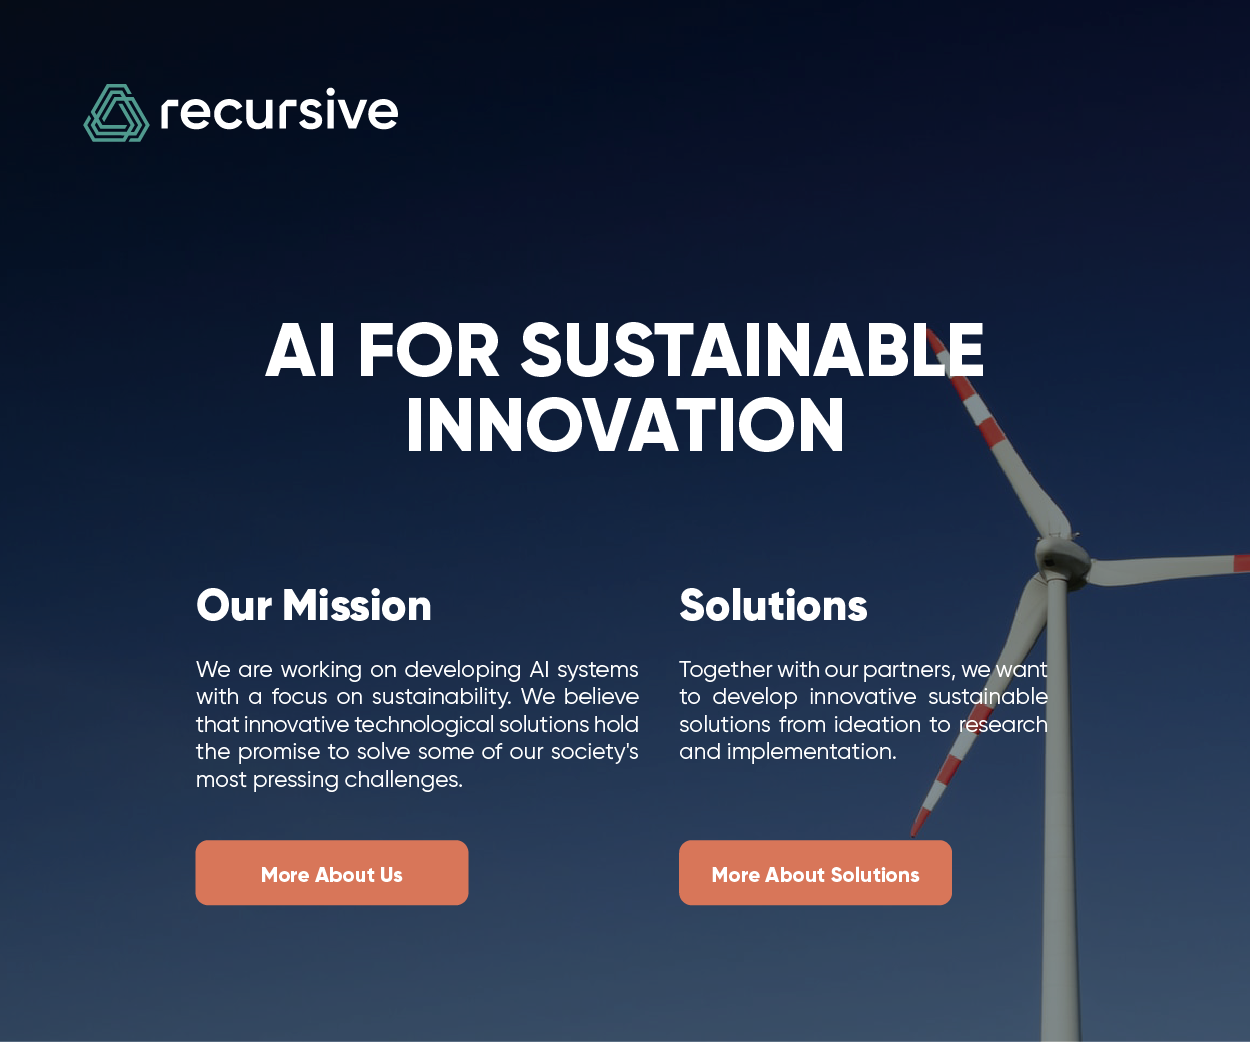 Recursive a consulting company working on developing AI systems with a focus on sustainability Website Mockup Image